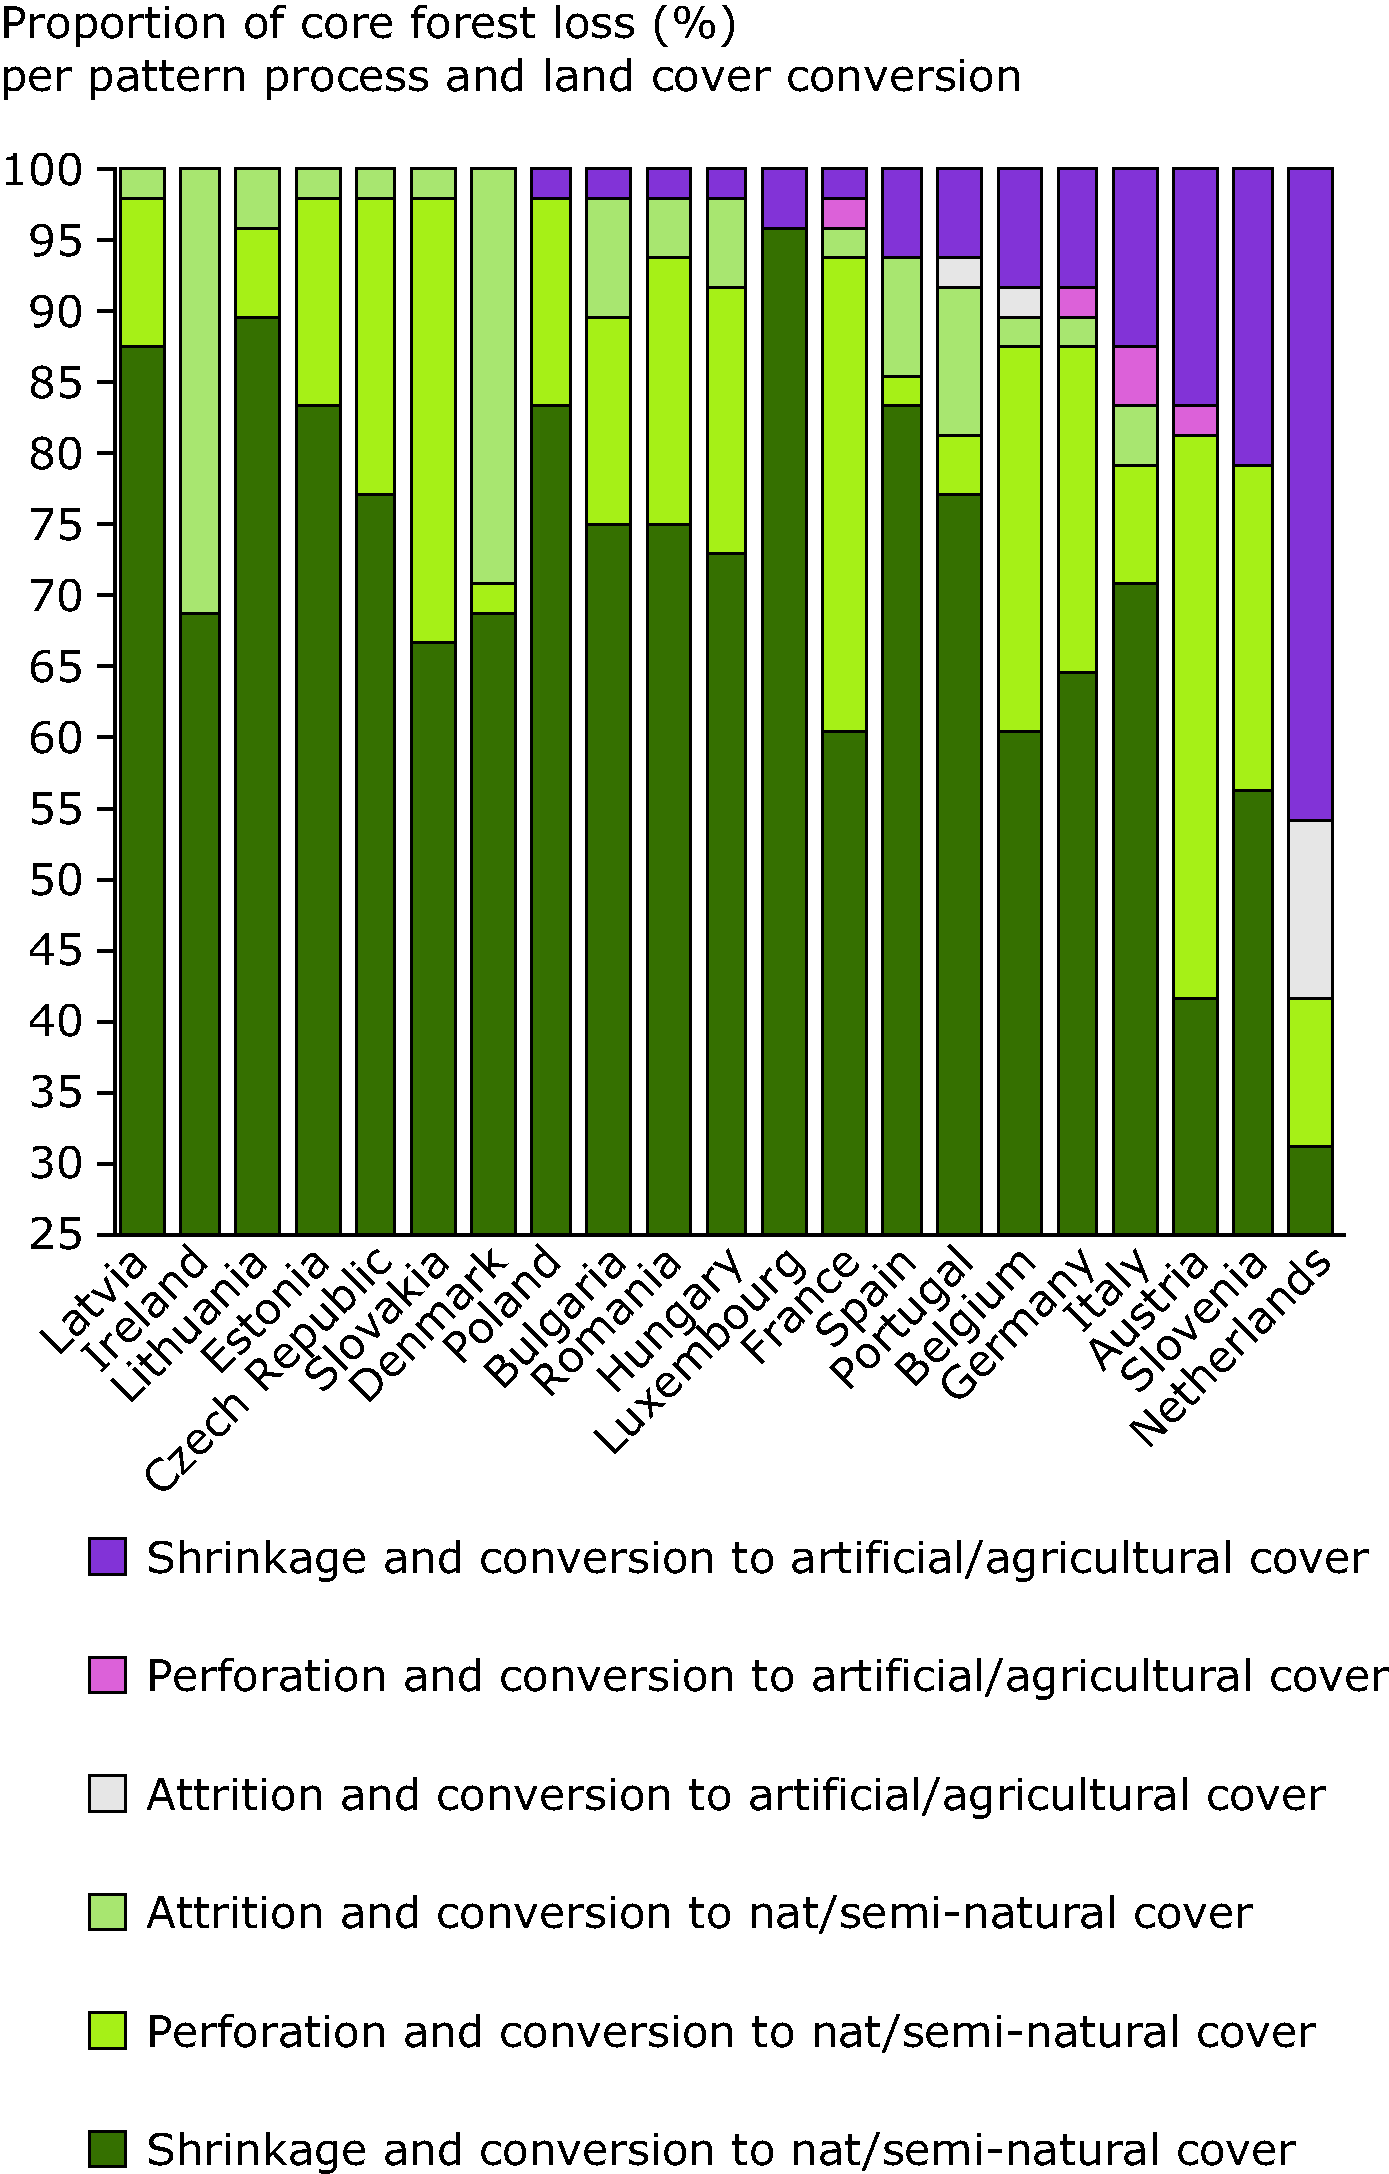 National patterns of core forest loss (%) by type of forest conversion and forest fragmentation process